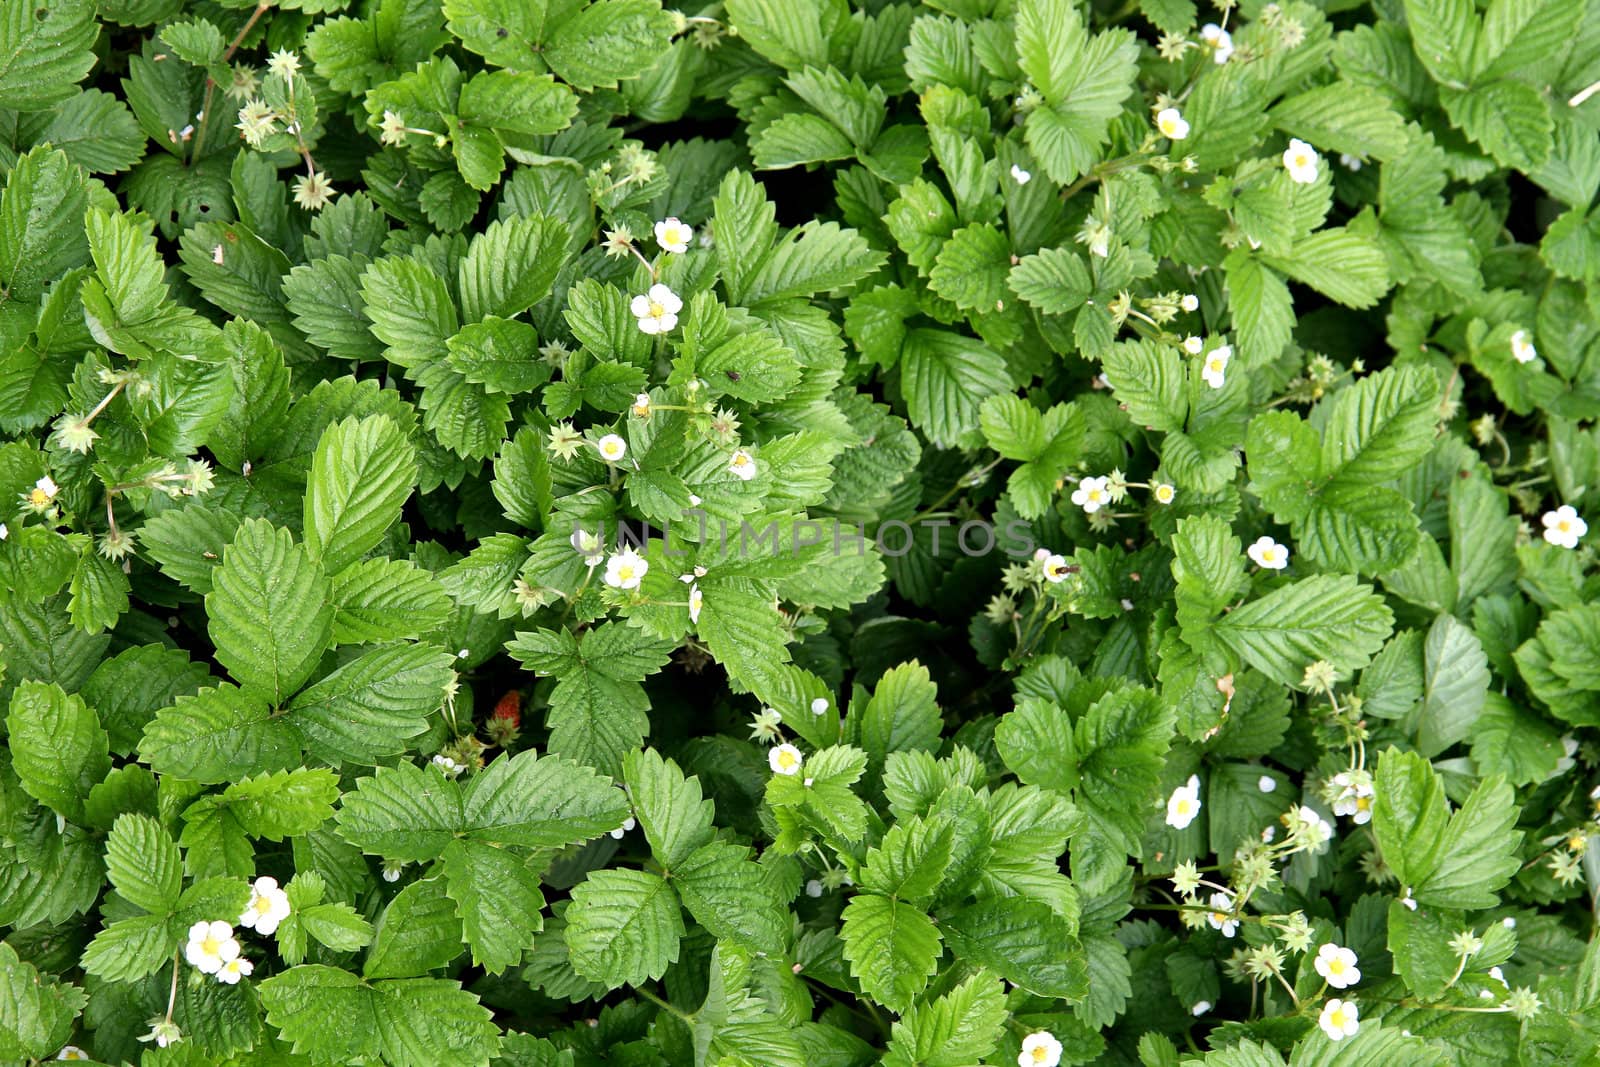 strawberries plants in the green color as natural background